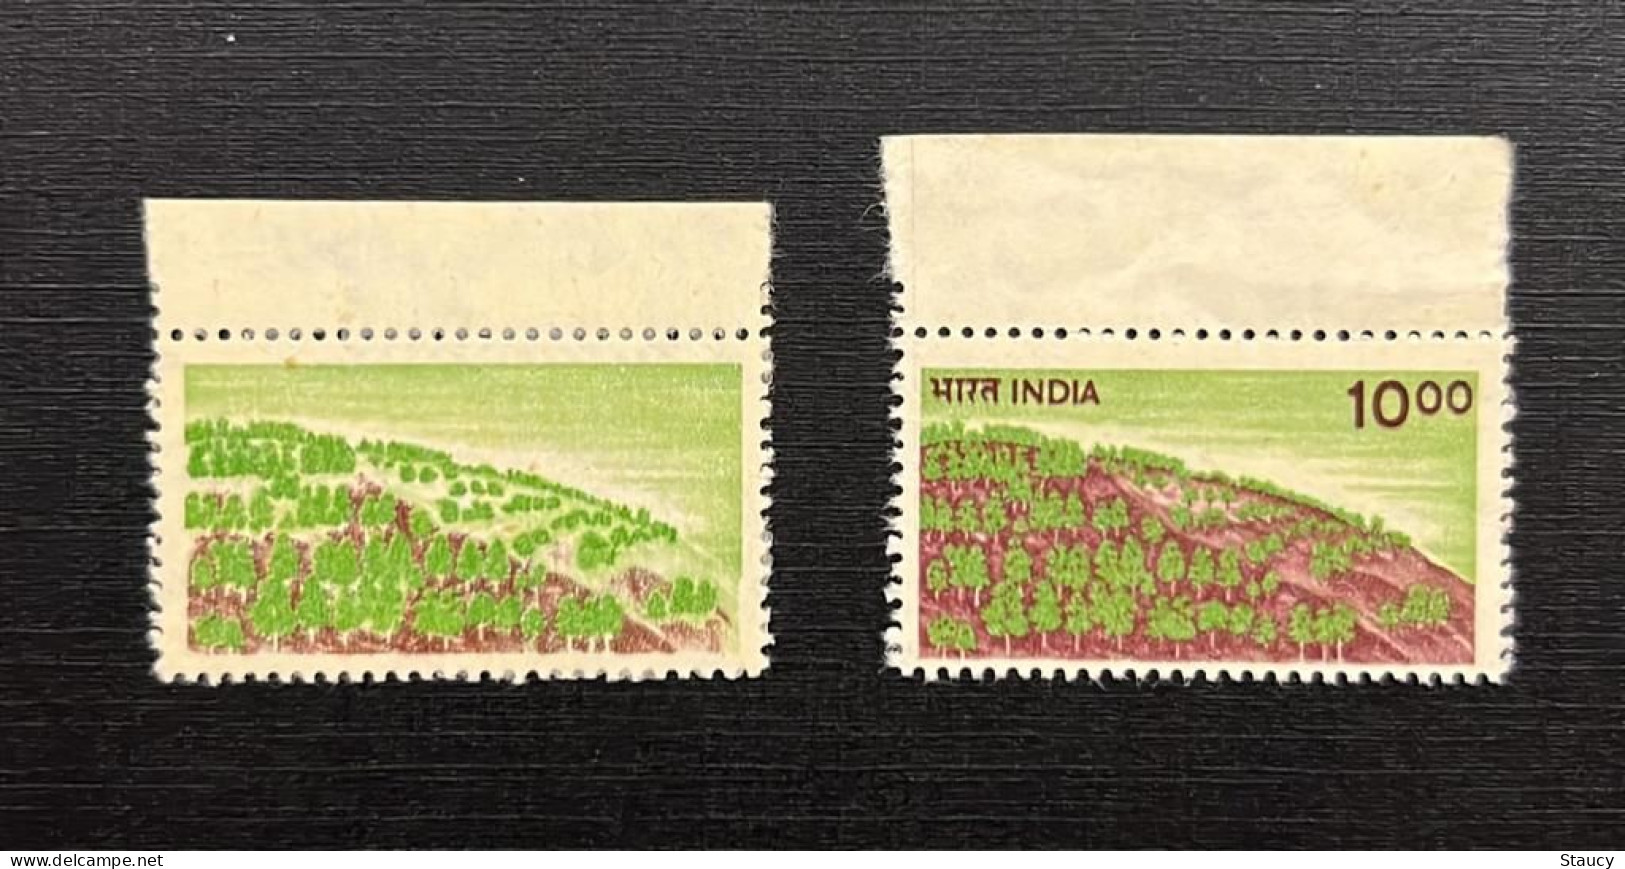 India 1988 Error 6th Definitive Series, Rs.10  Afforestation / Tree Error "partly BROWN COLOUR OMMITTED" MNH As Per Scan - Fouten Op Zegels